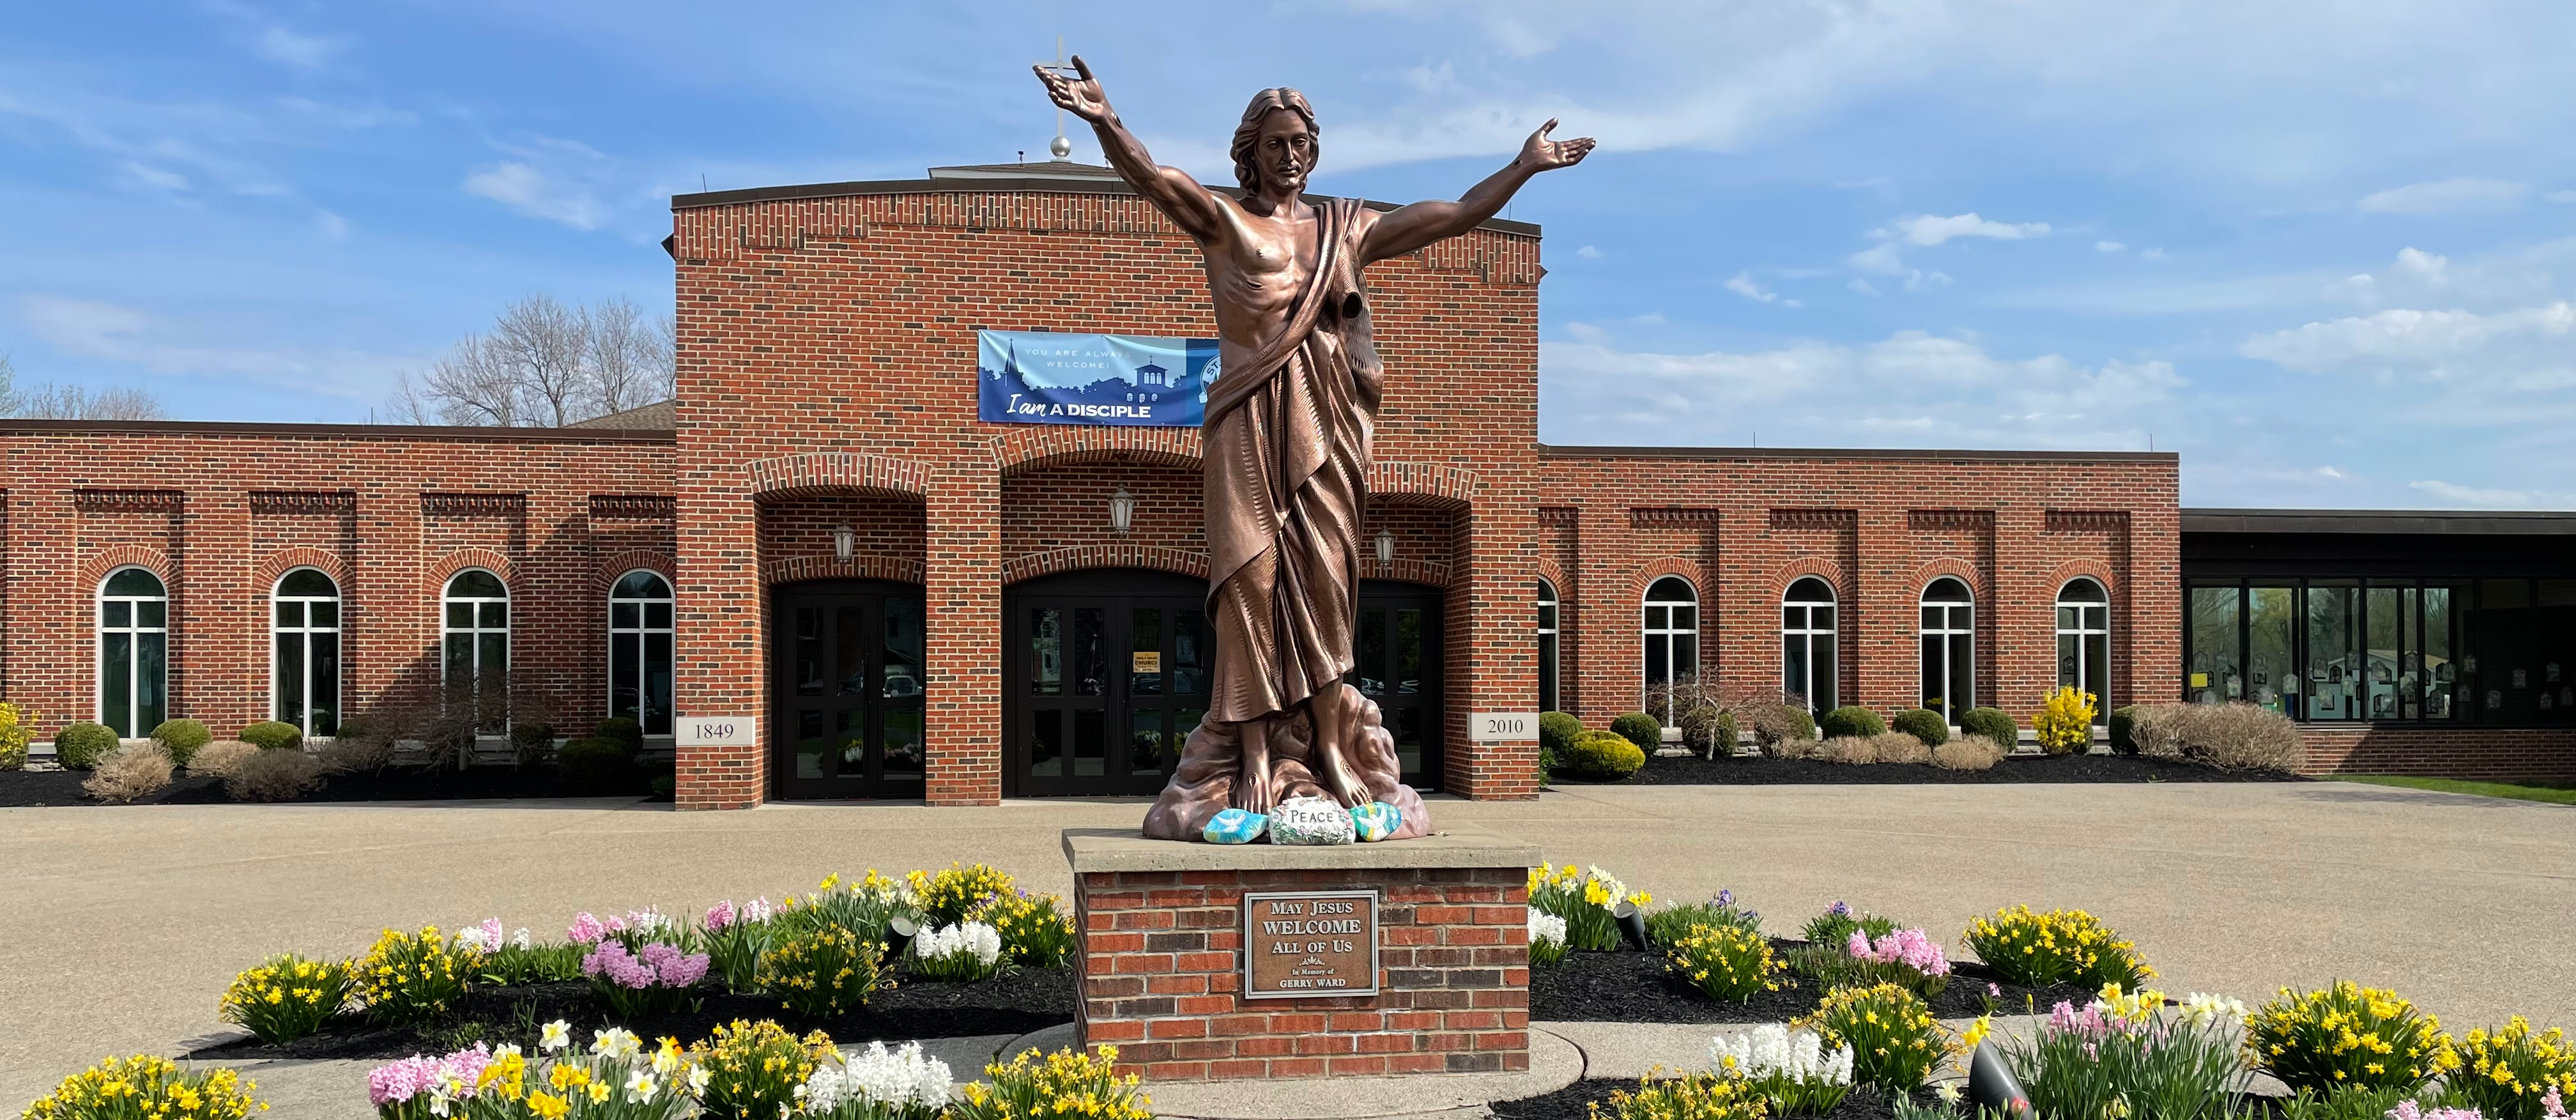 Statue of Jesus in front of a church